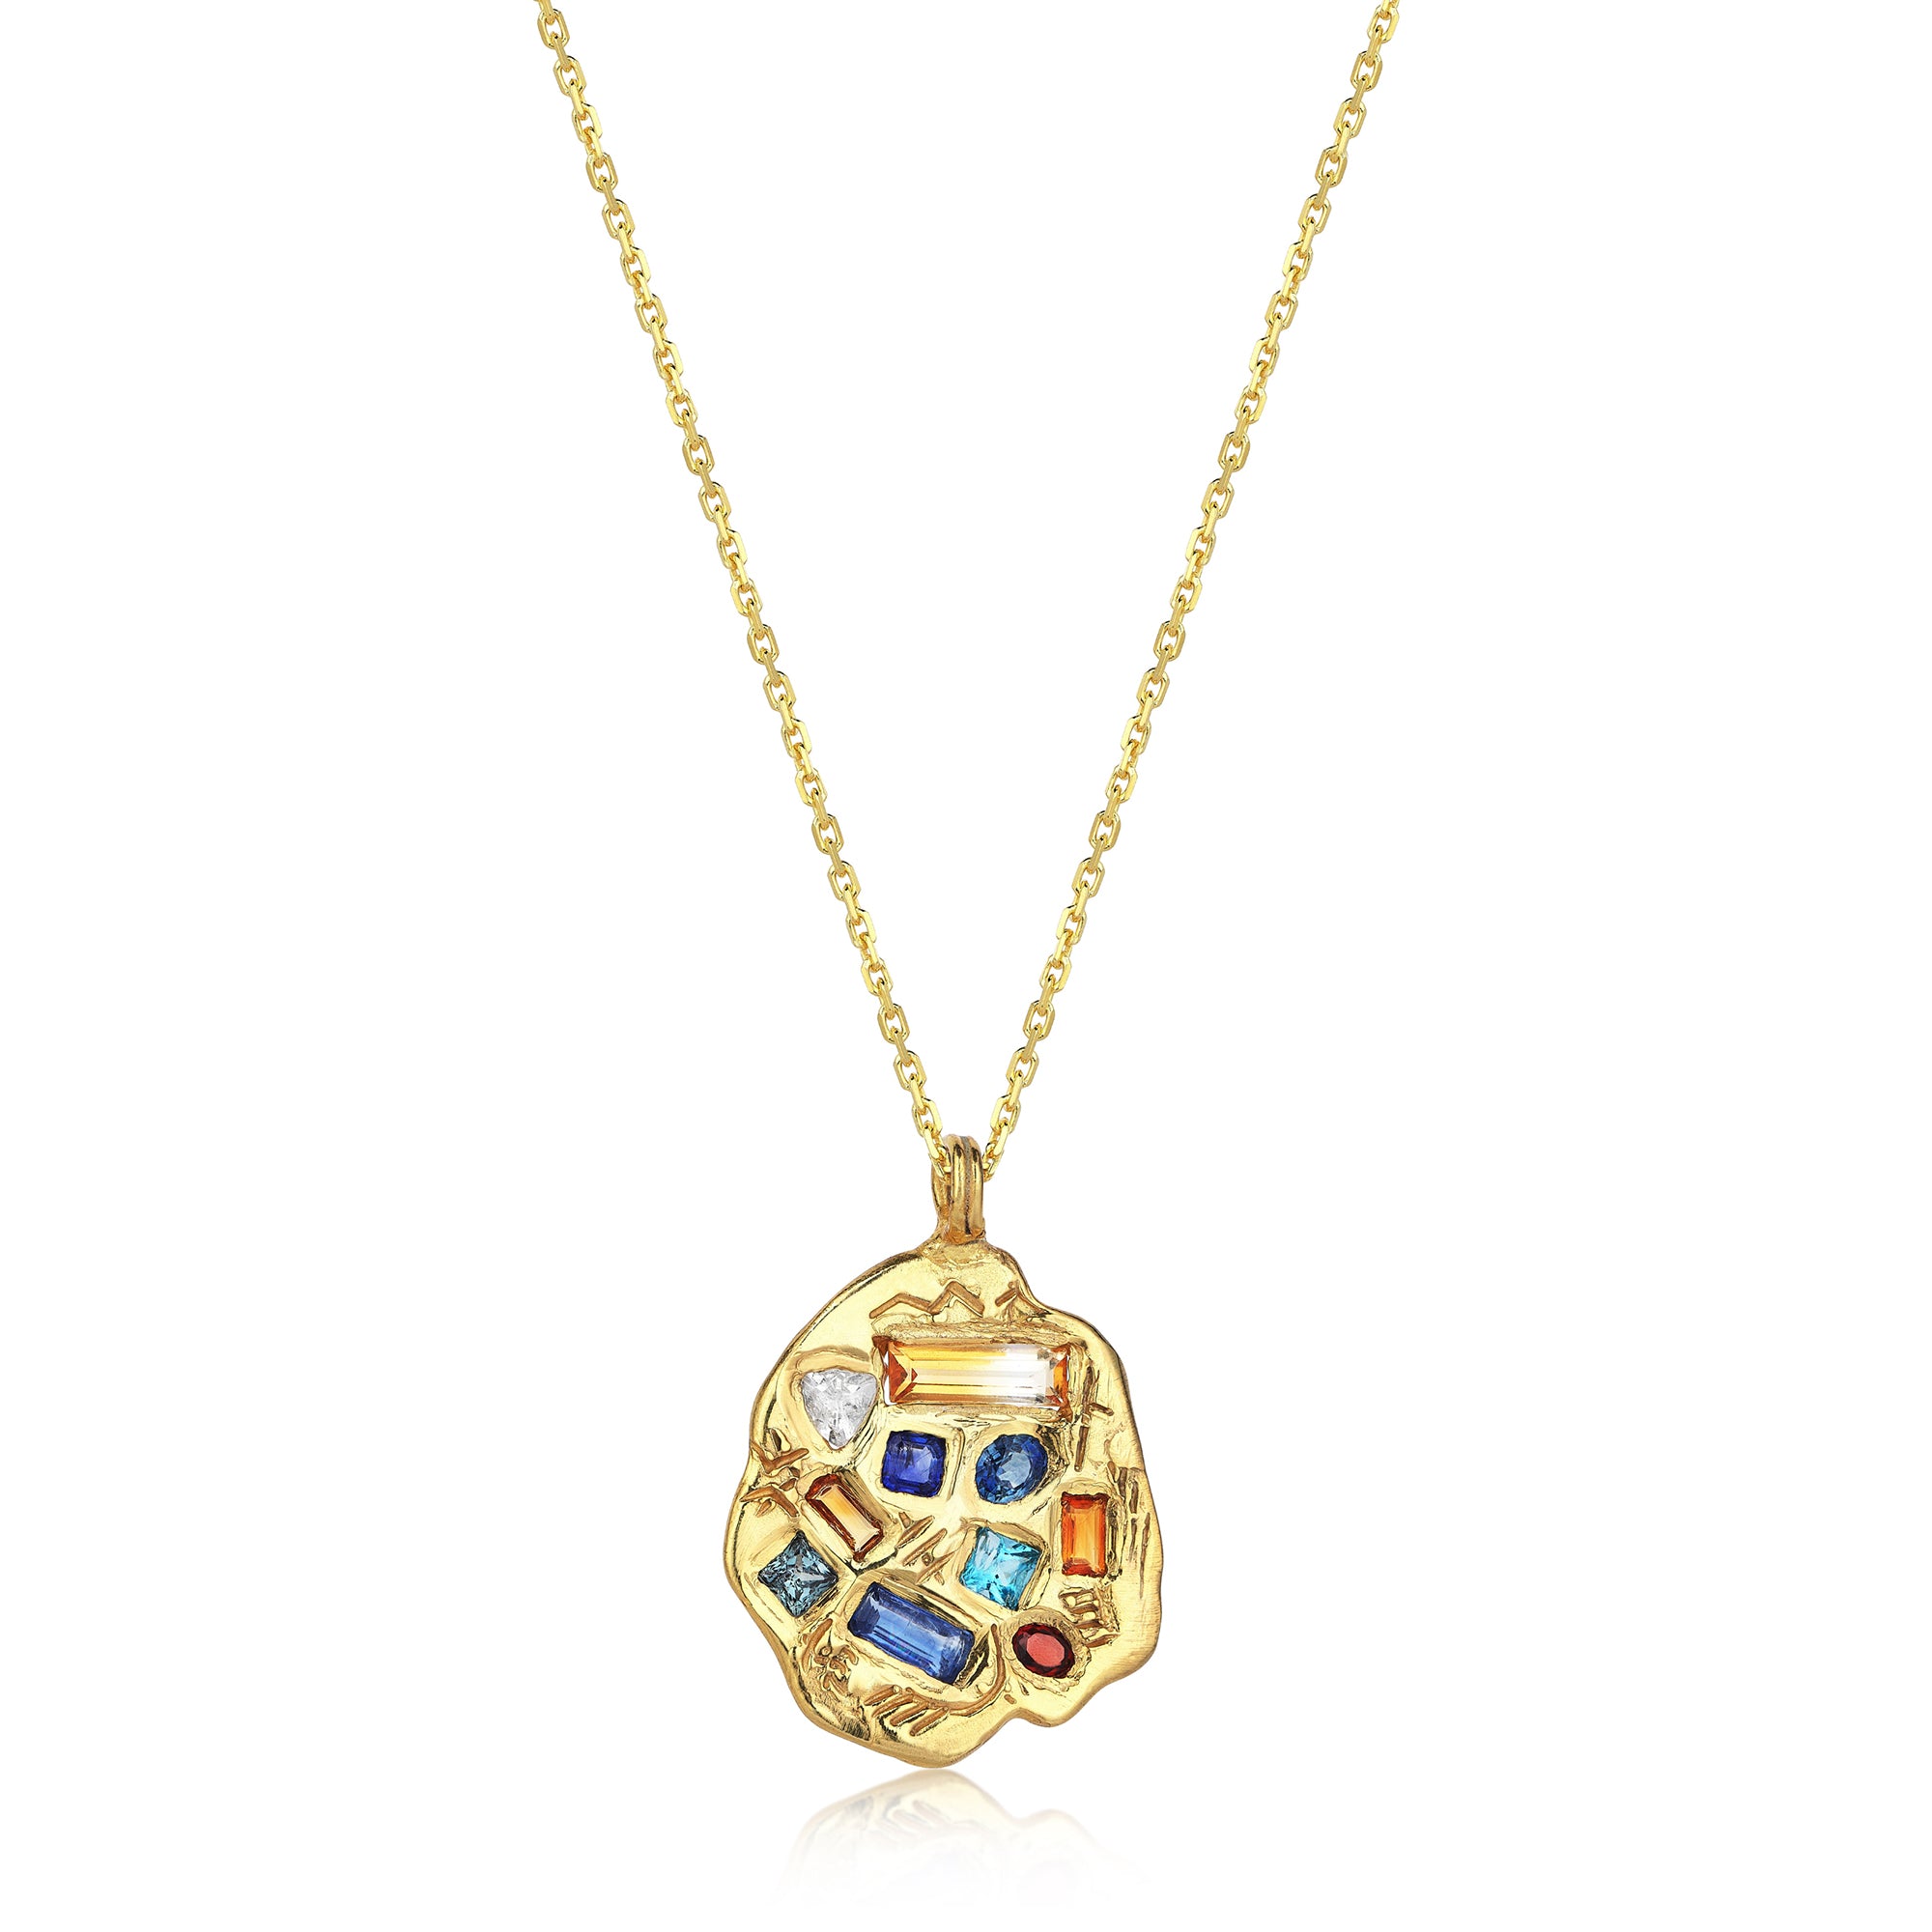 THE PICASSO PALETTE NECKLACE